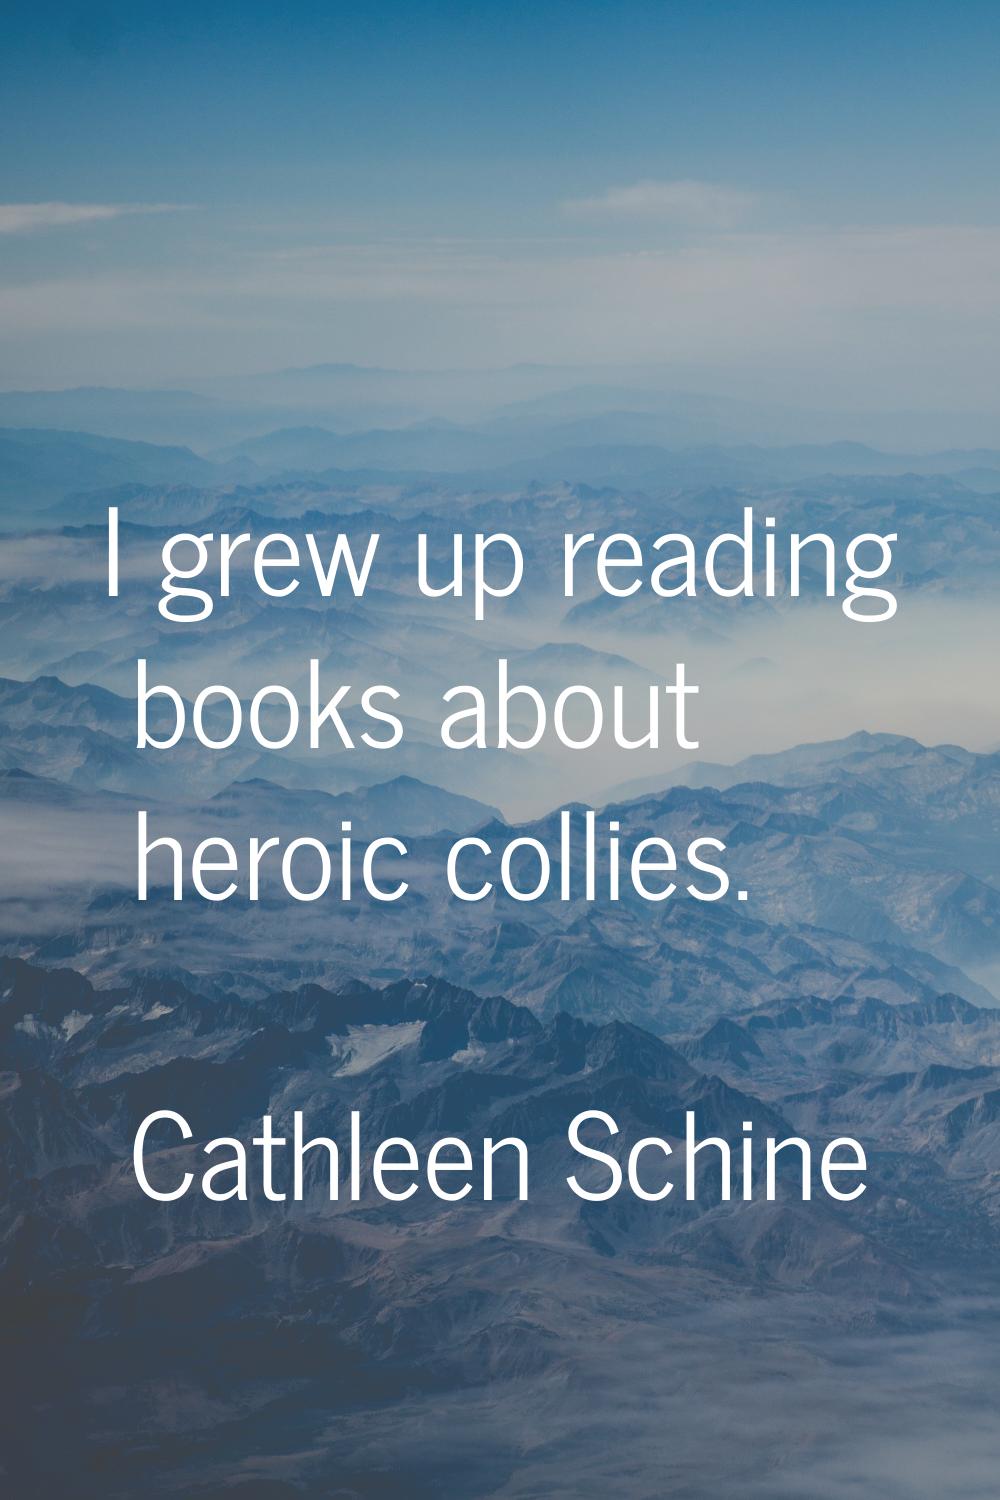 I grew up reading books about heroic collies.